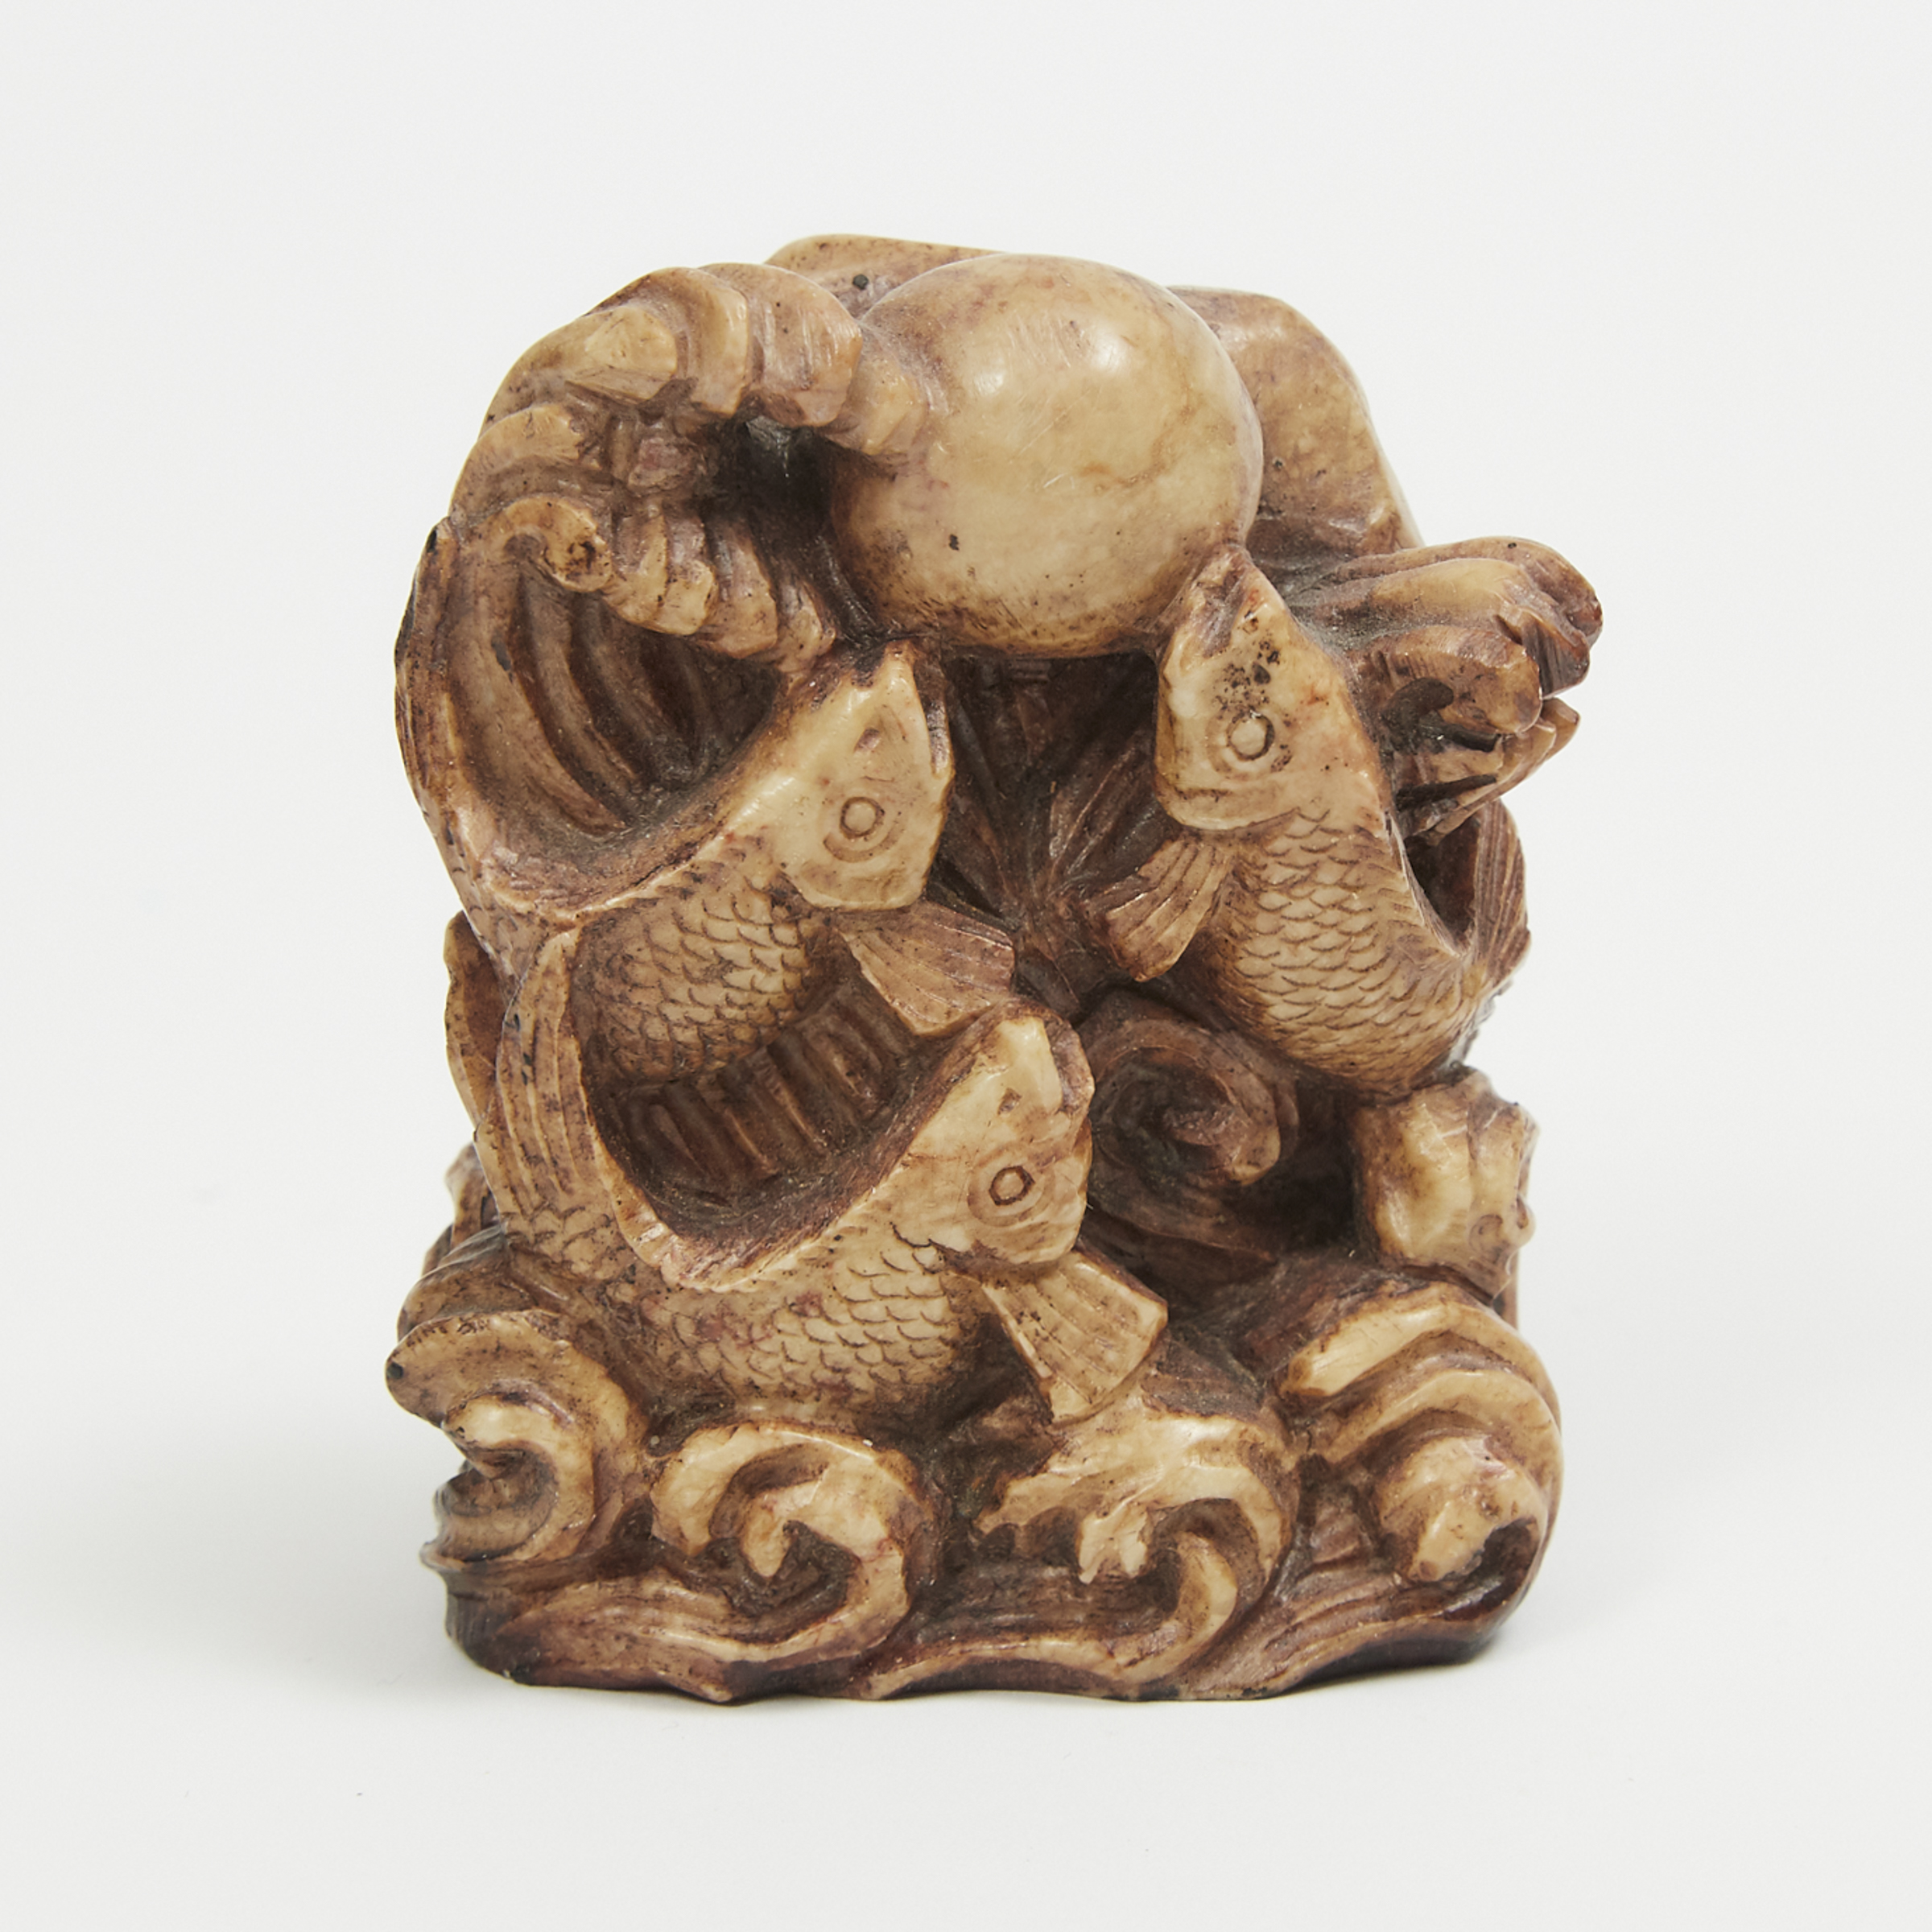 A Group of Three Soapstone Carvings, Early 20th Century